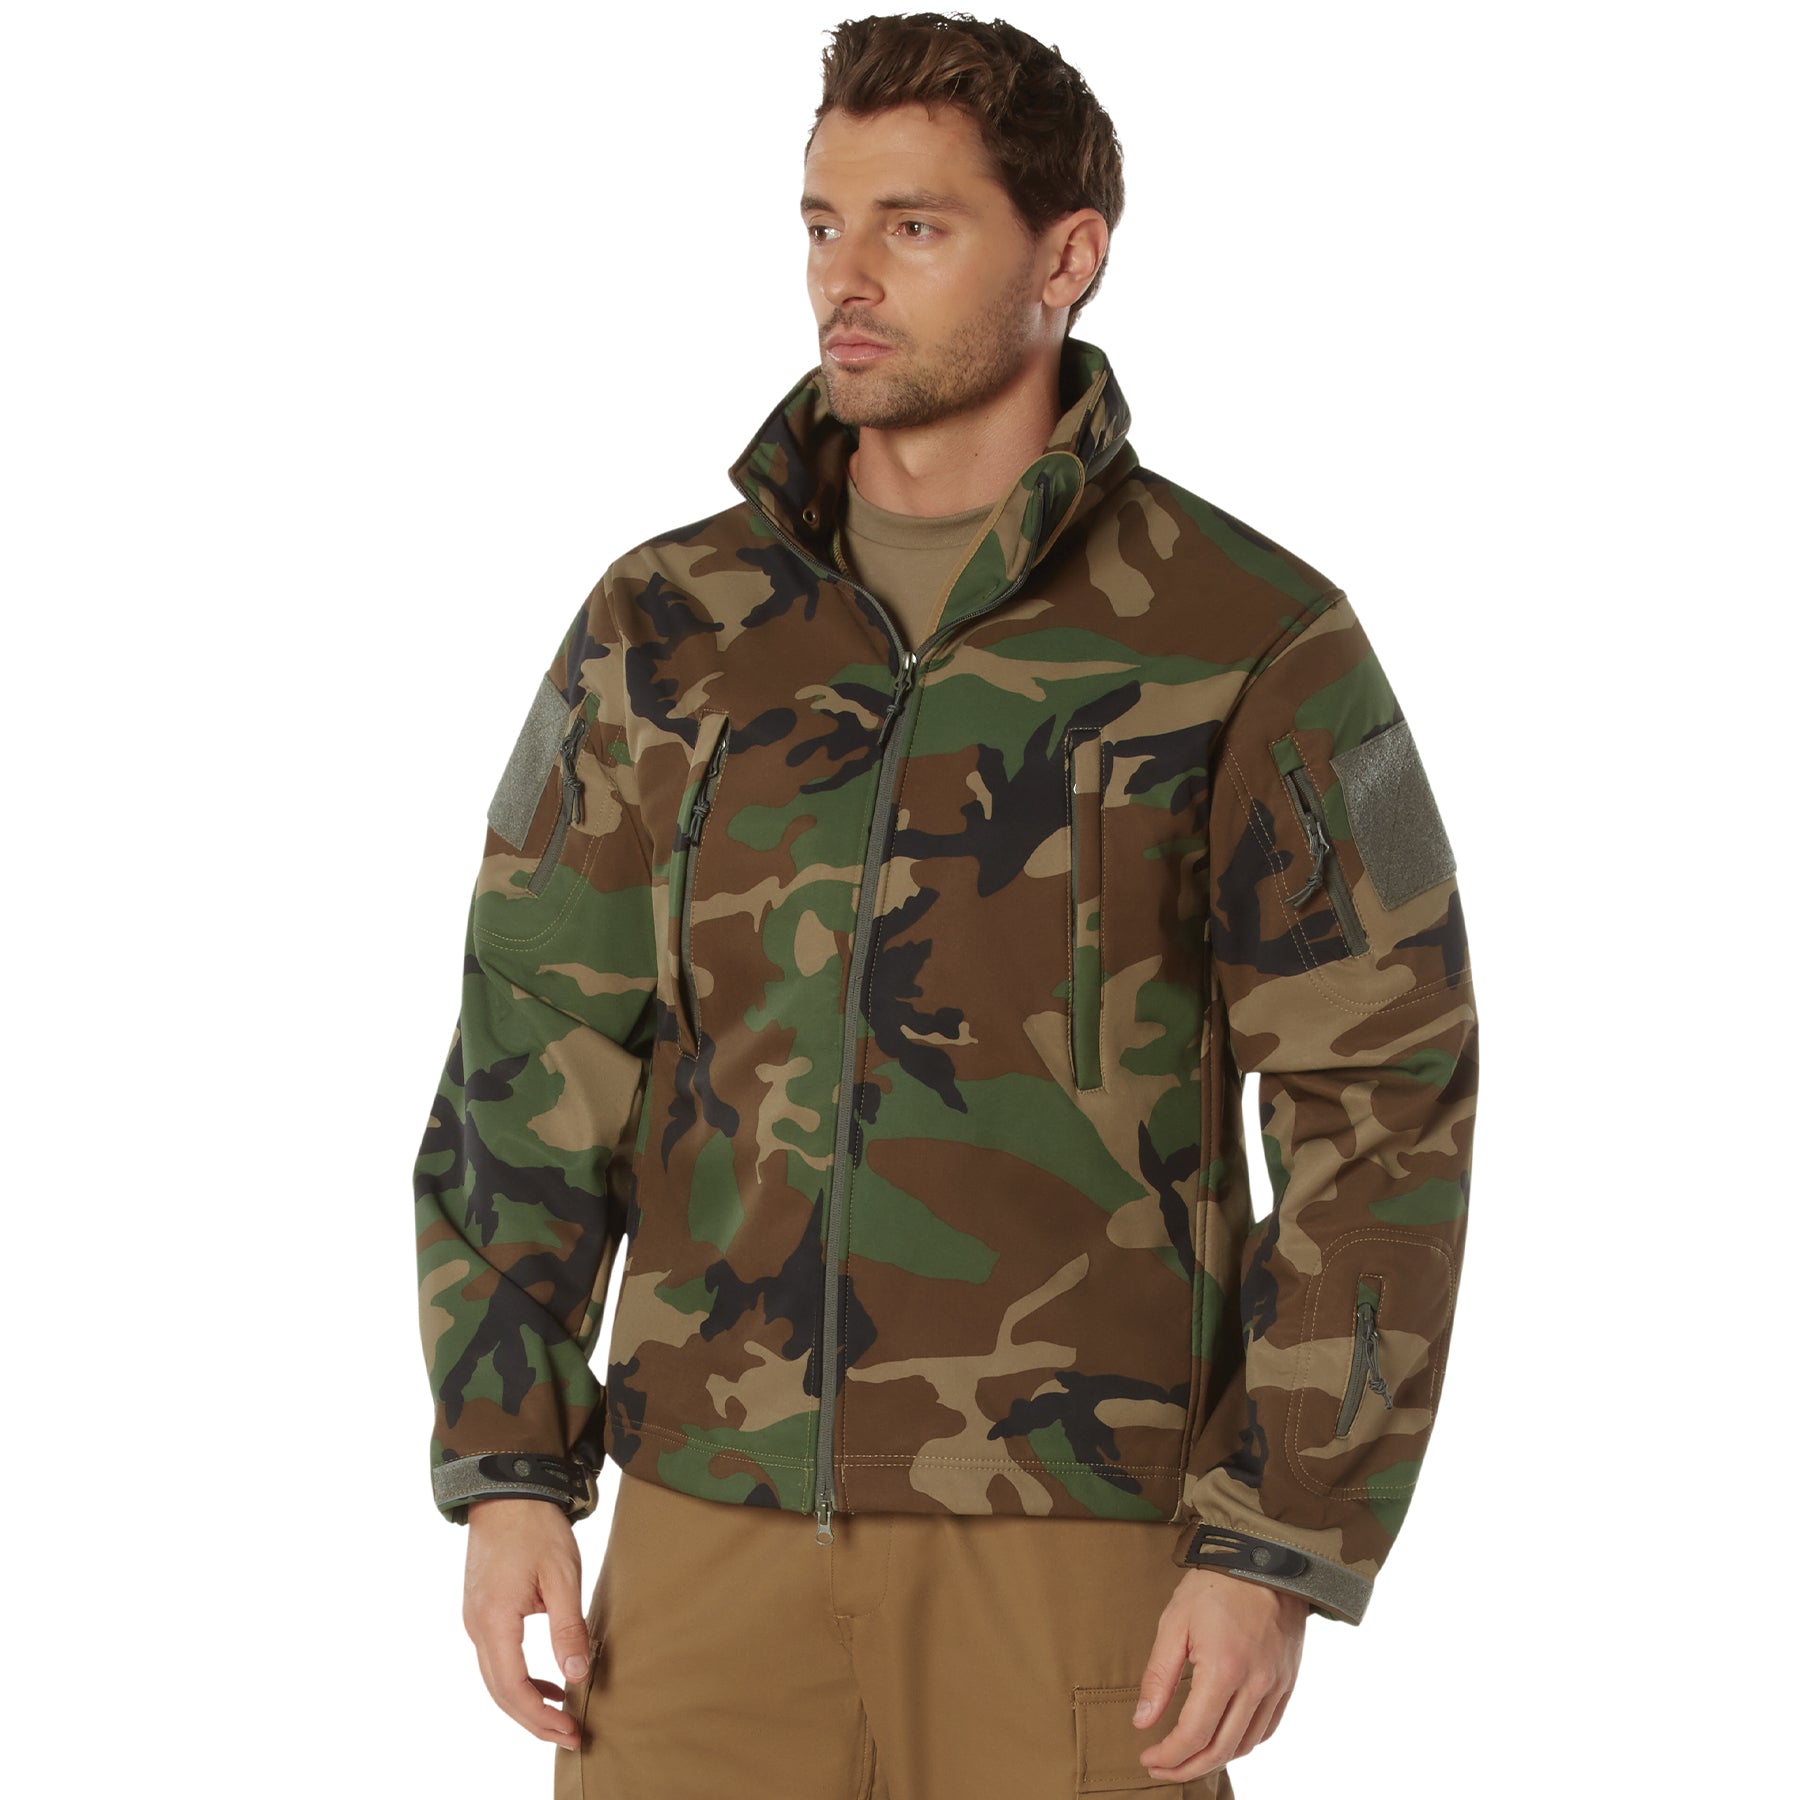 Poly Camo Spec Ops Tactical Soft Shell Jackets Woodland Camo